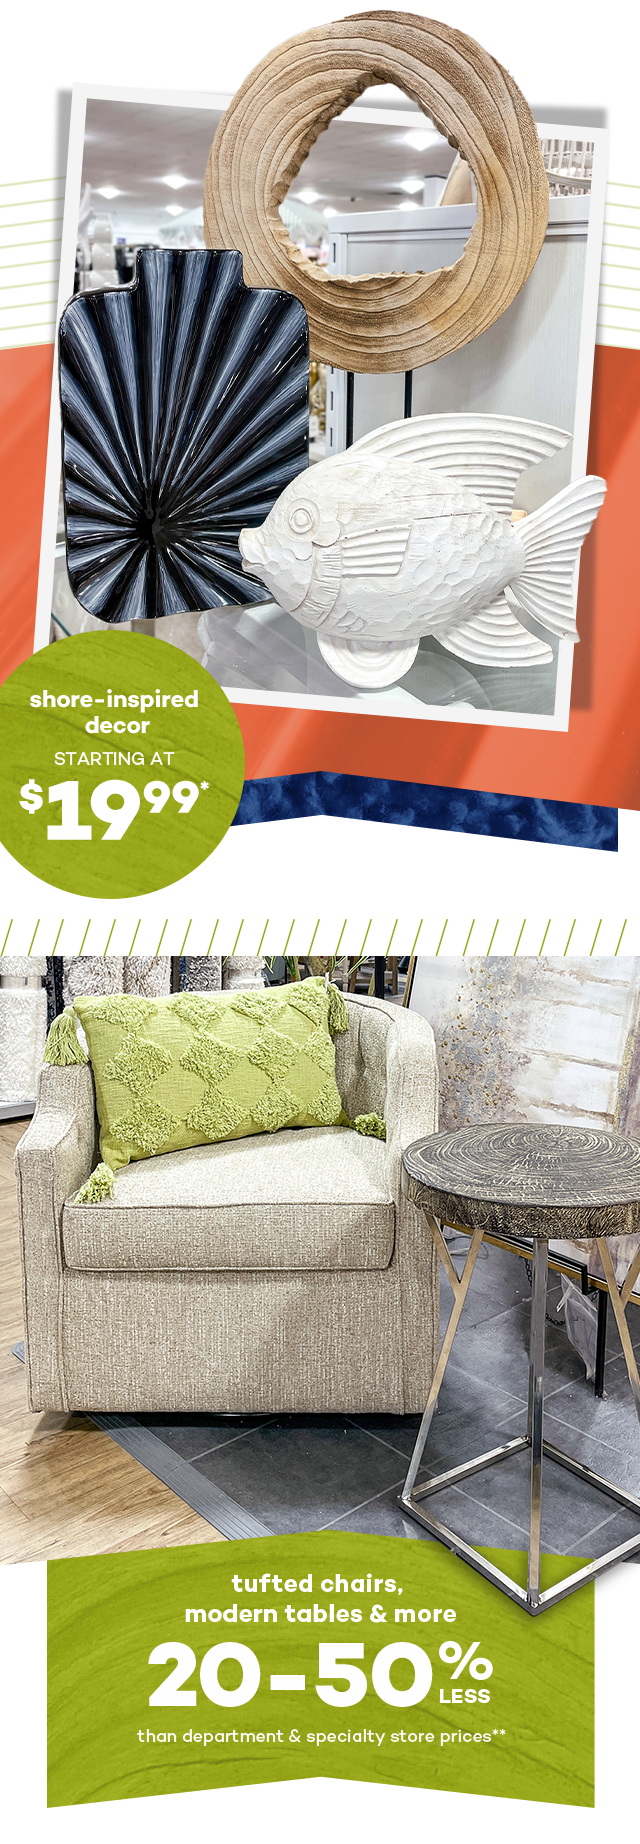 Shore-inspired decor starting at $19.99.** Tufted chairs, modern tables and more 20 to 50% less than department and specialty store prices.*